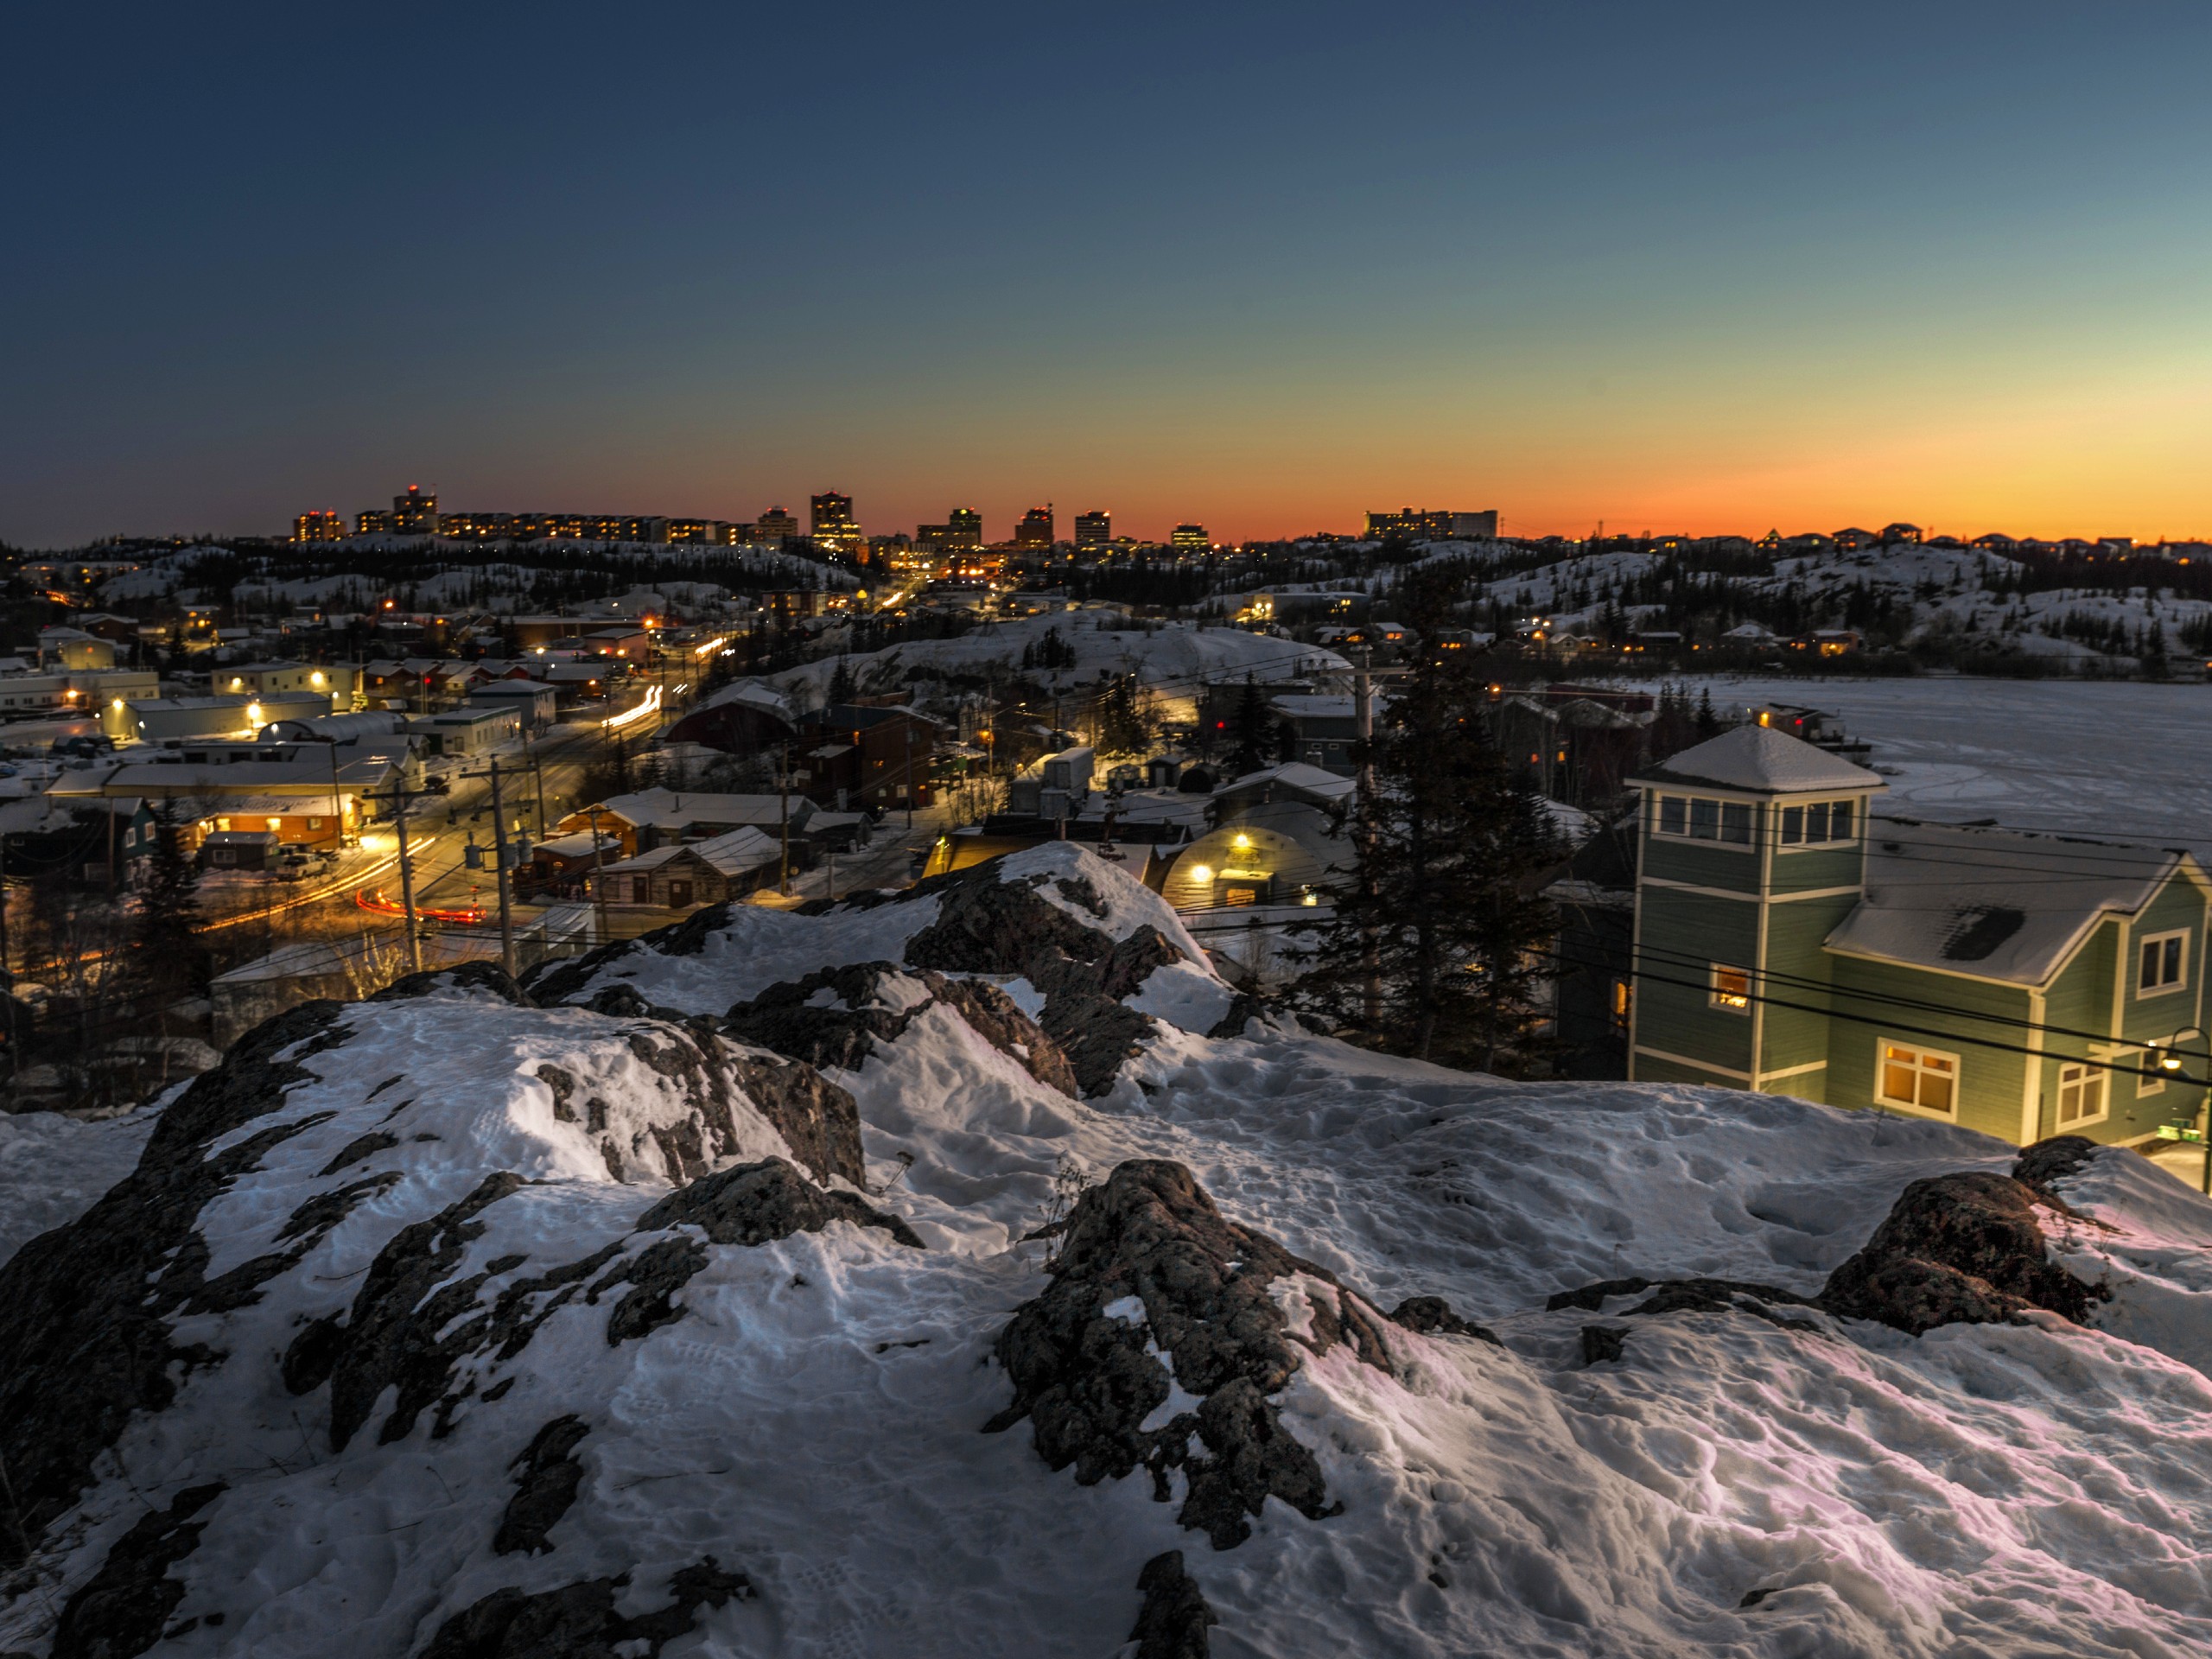 Sunset over the Yellowknife